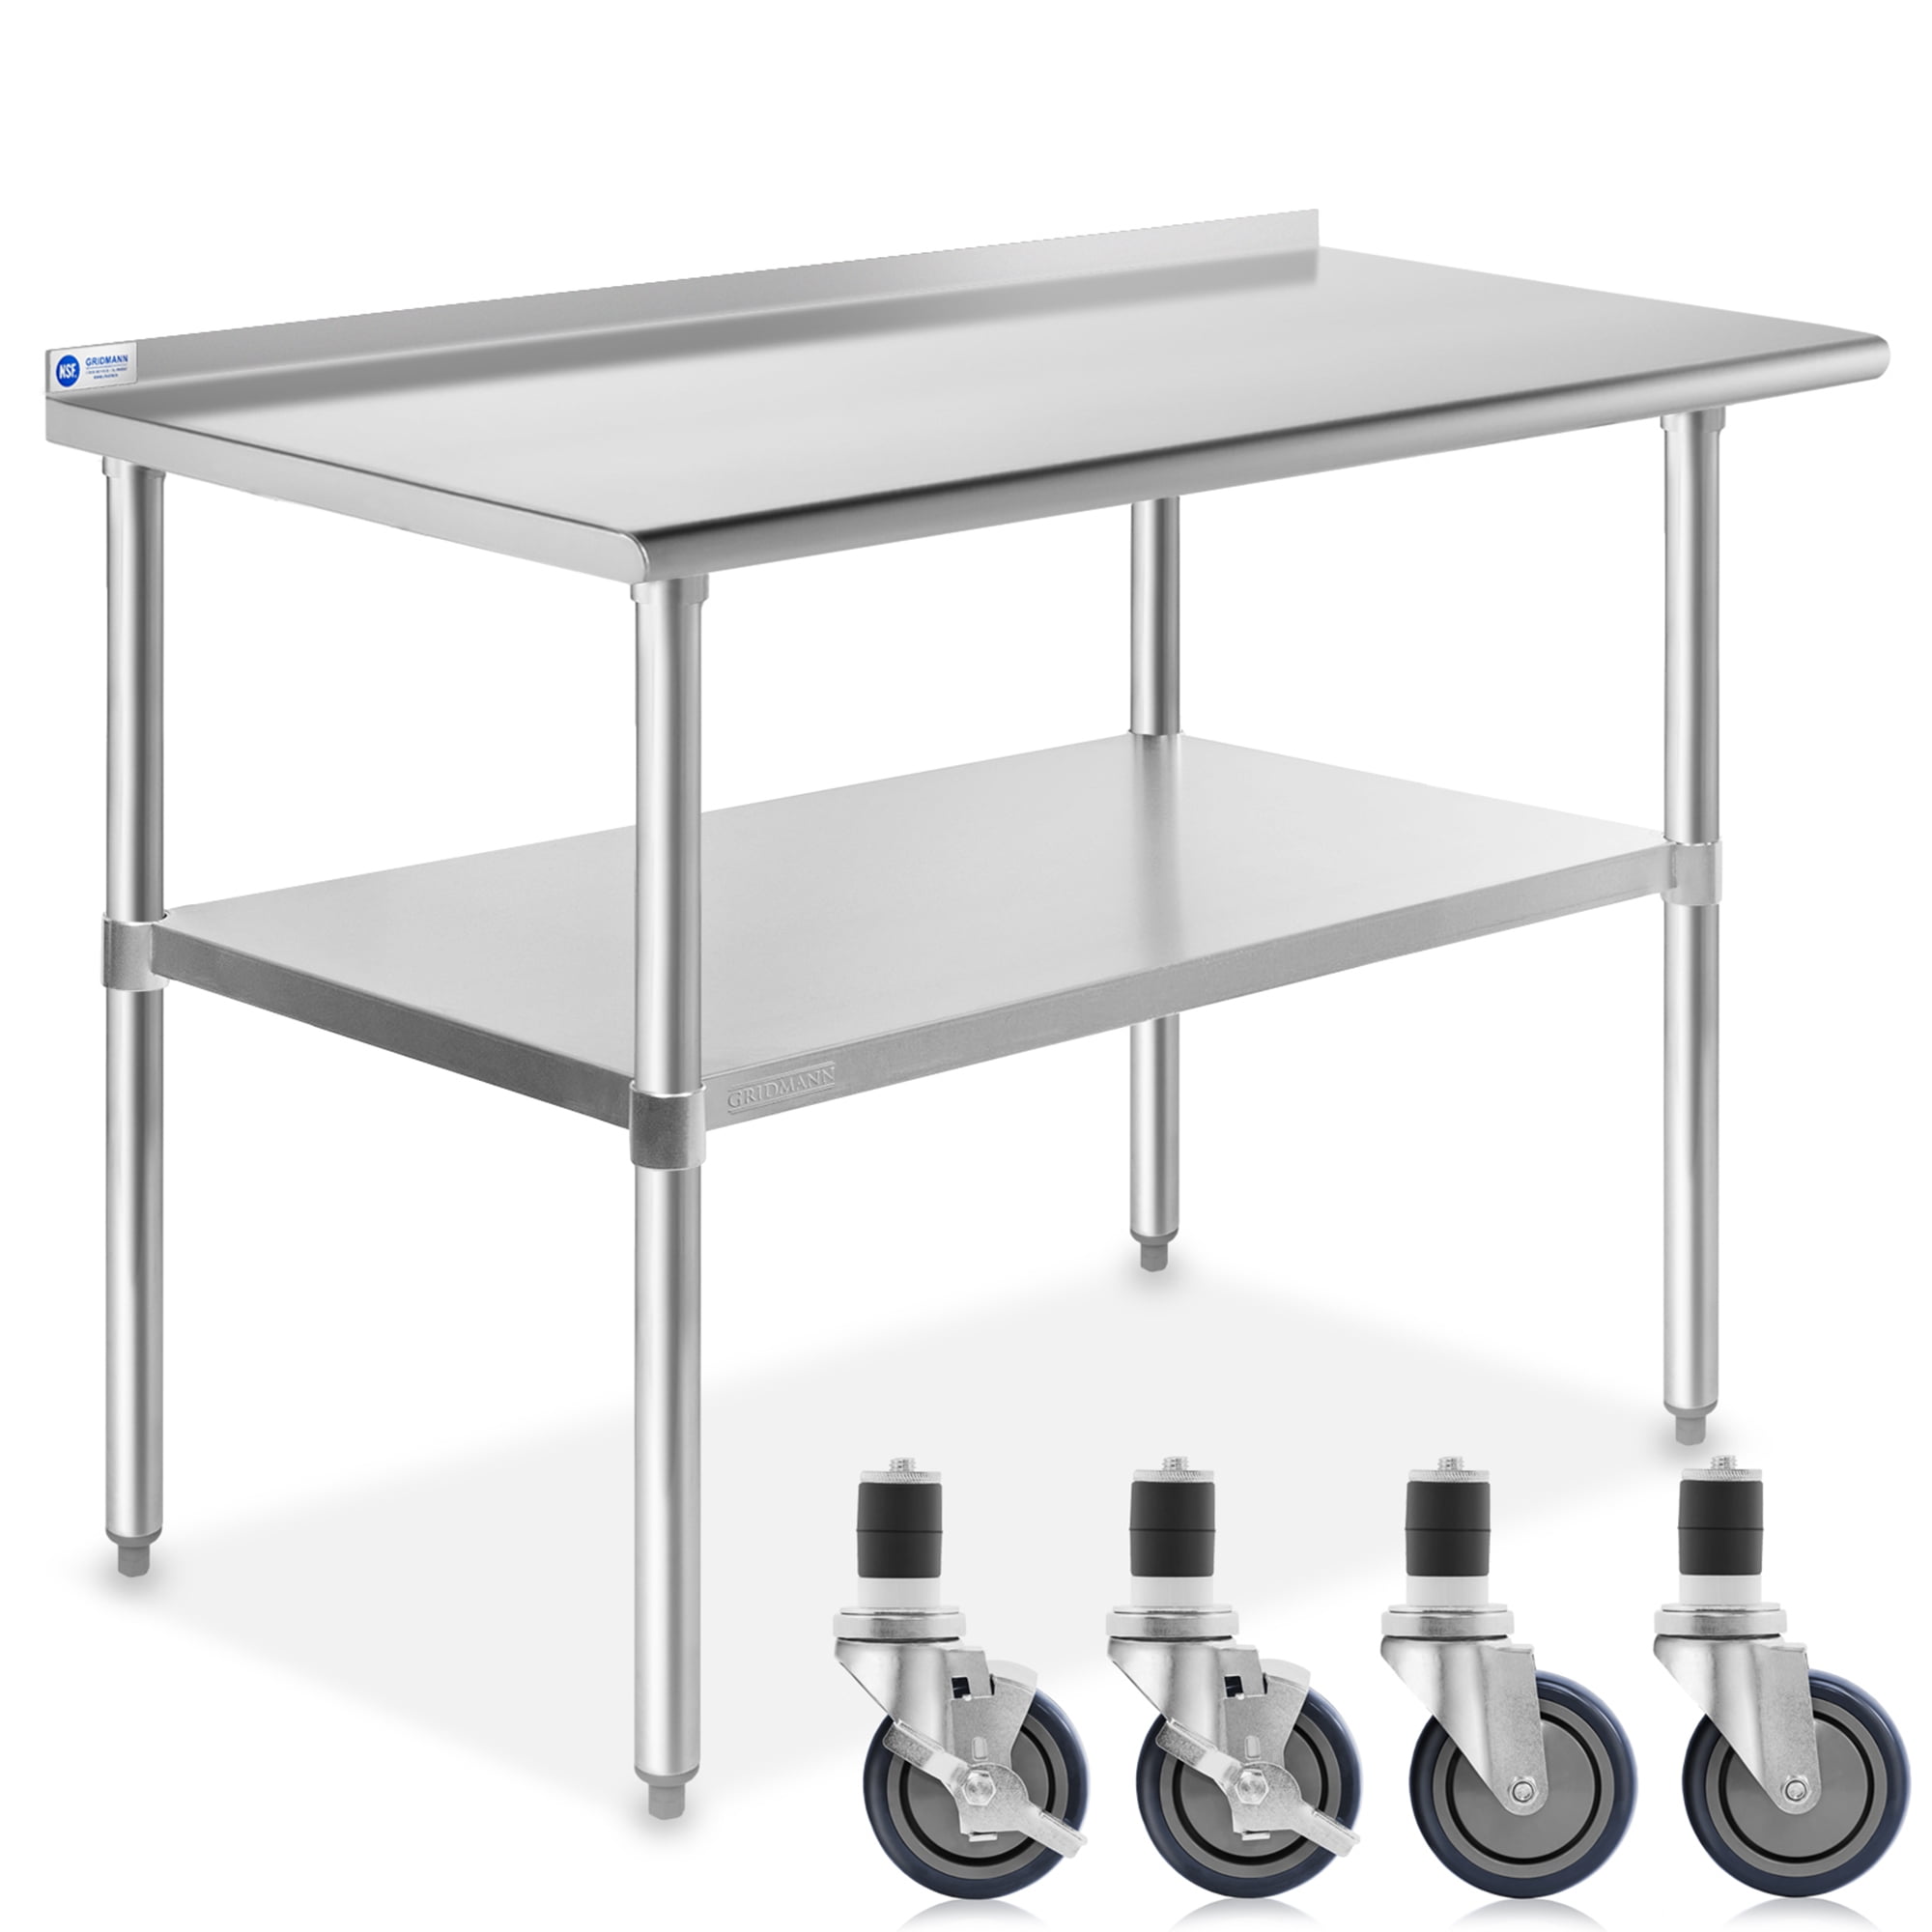 NSF KPS Commercial Stainless Steel Work Table with Crossbar 24 x 24 with Wheels 4 Casters 